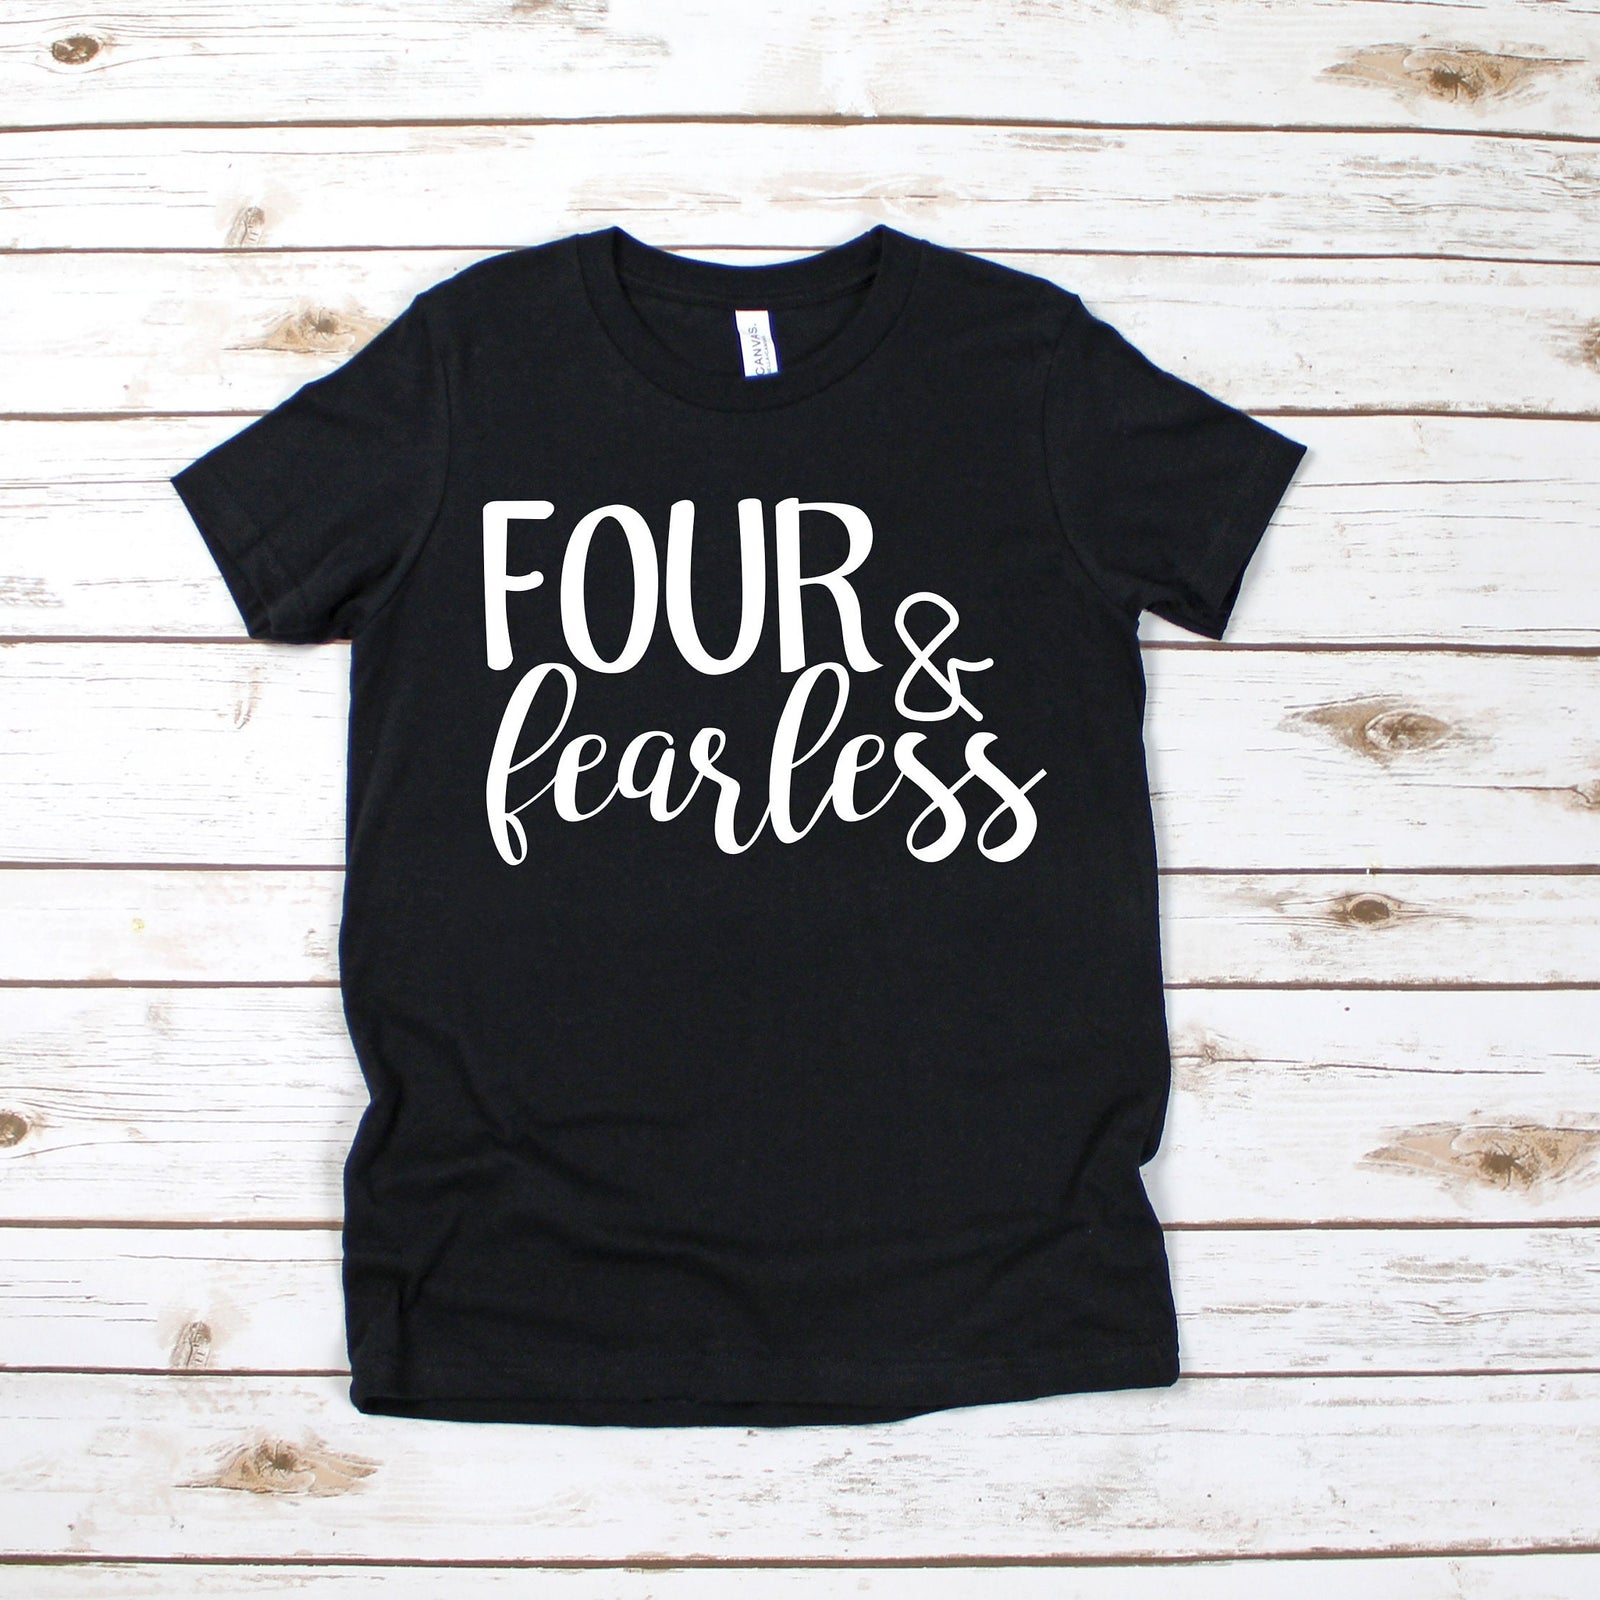 Four and Fearless T Shirt - Birthday Shirt for Boy - Birthday Shirt for Girl - Turning 4 - Turning Four